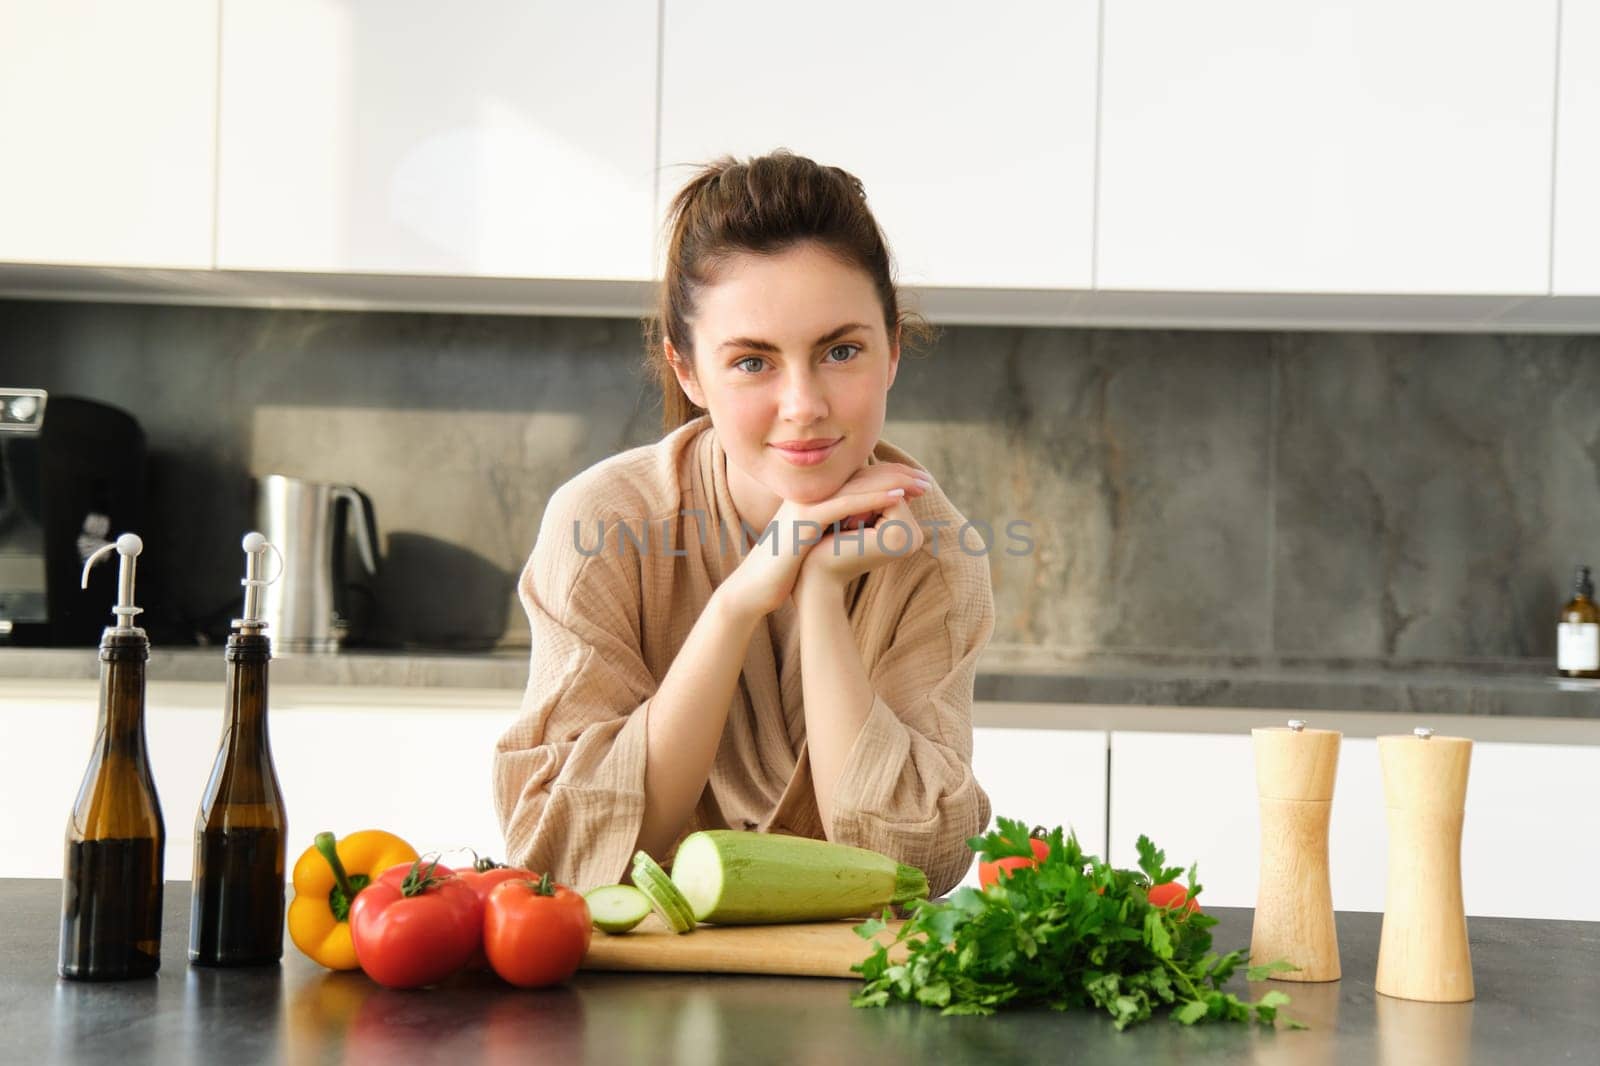 Healthy lifestyle. Young woman in bathrobe preparing food, chopping vegetables, cooking dinner on kitchen counter, standing over white background.